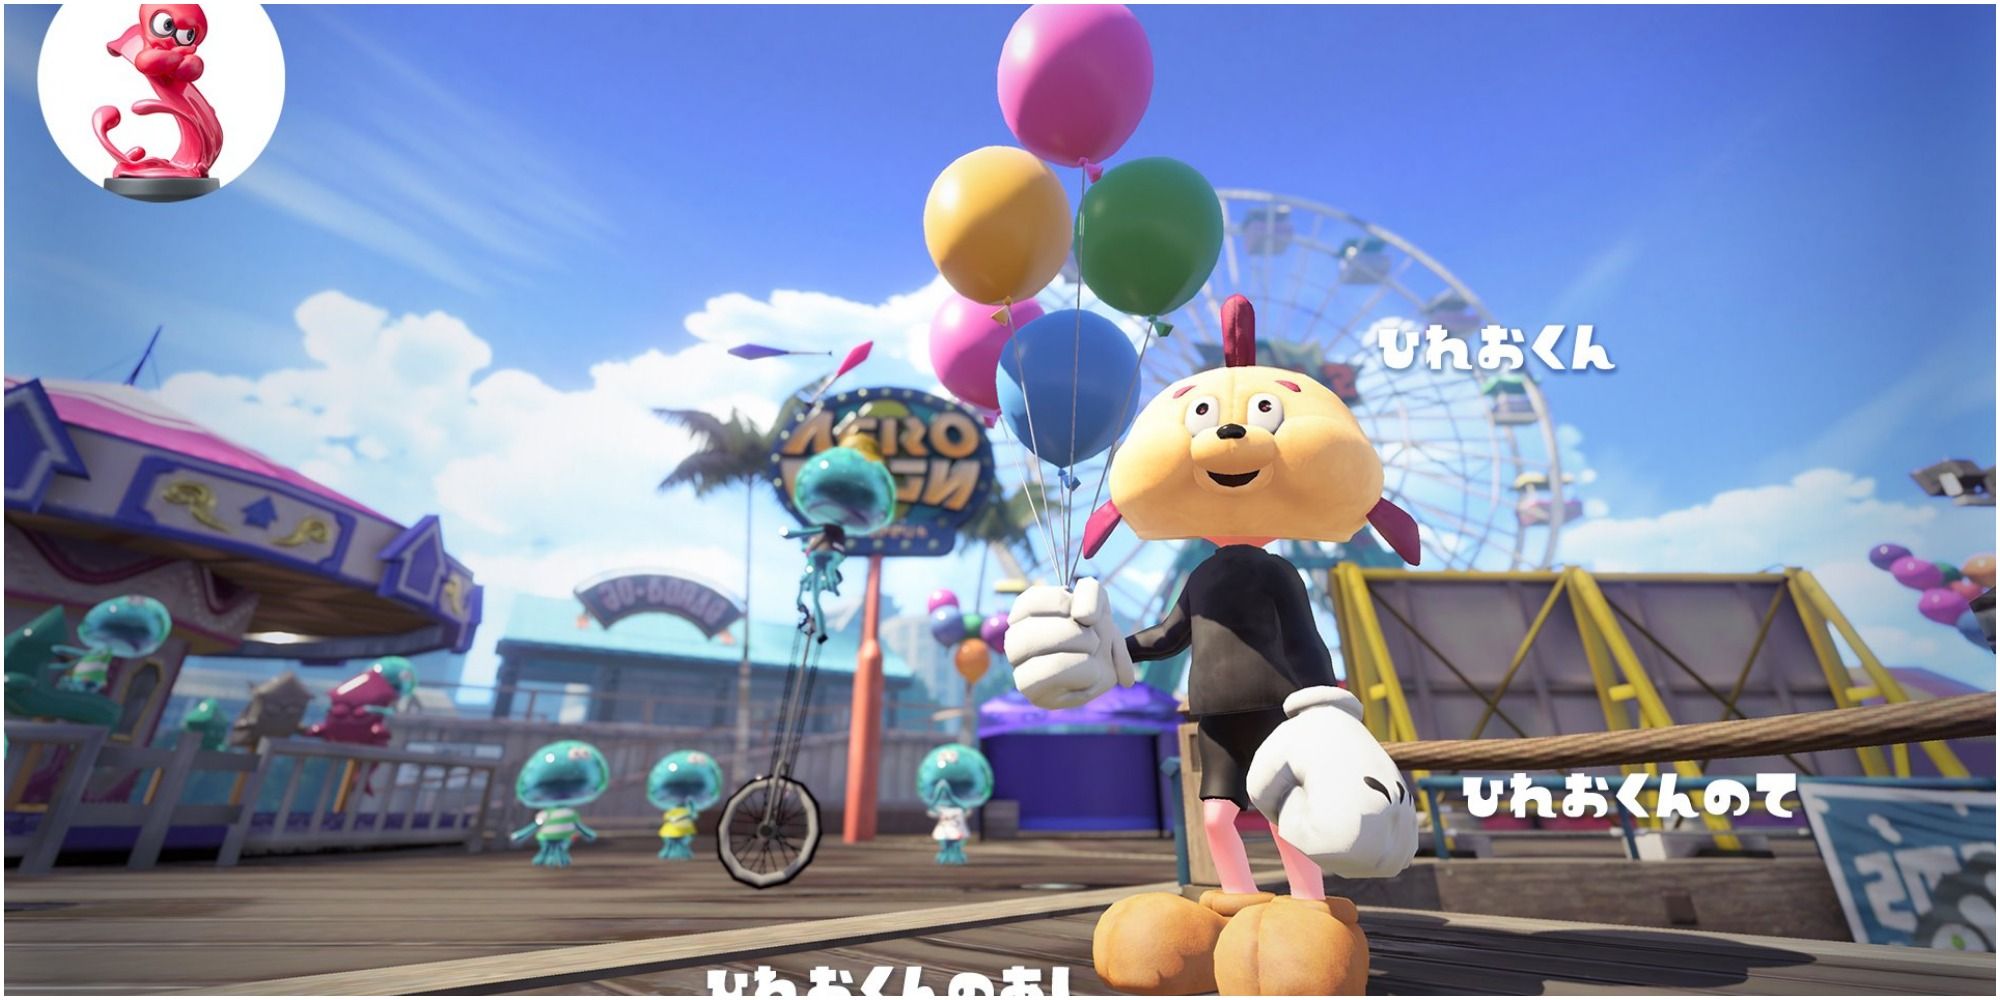 Inkling wearing Fresh Fish Costume appearing as a creepy Mickey Mouse stands on pier holding balloons